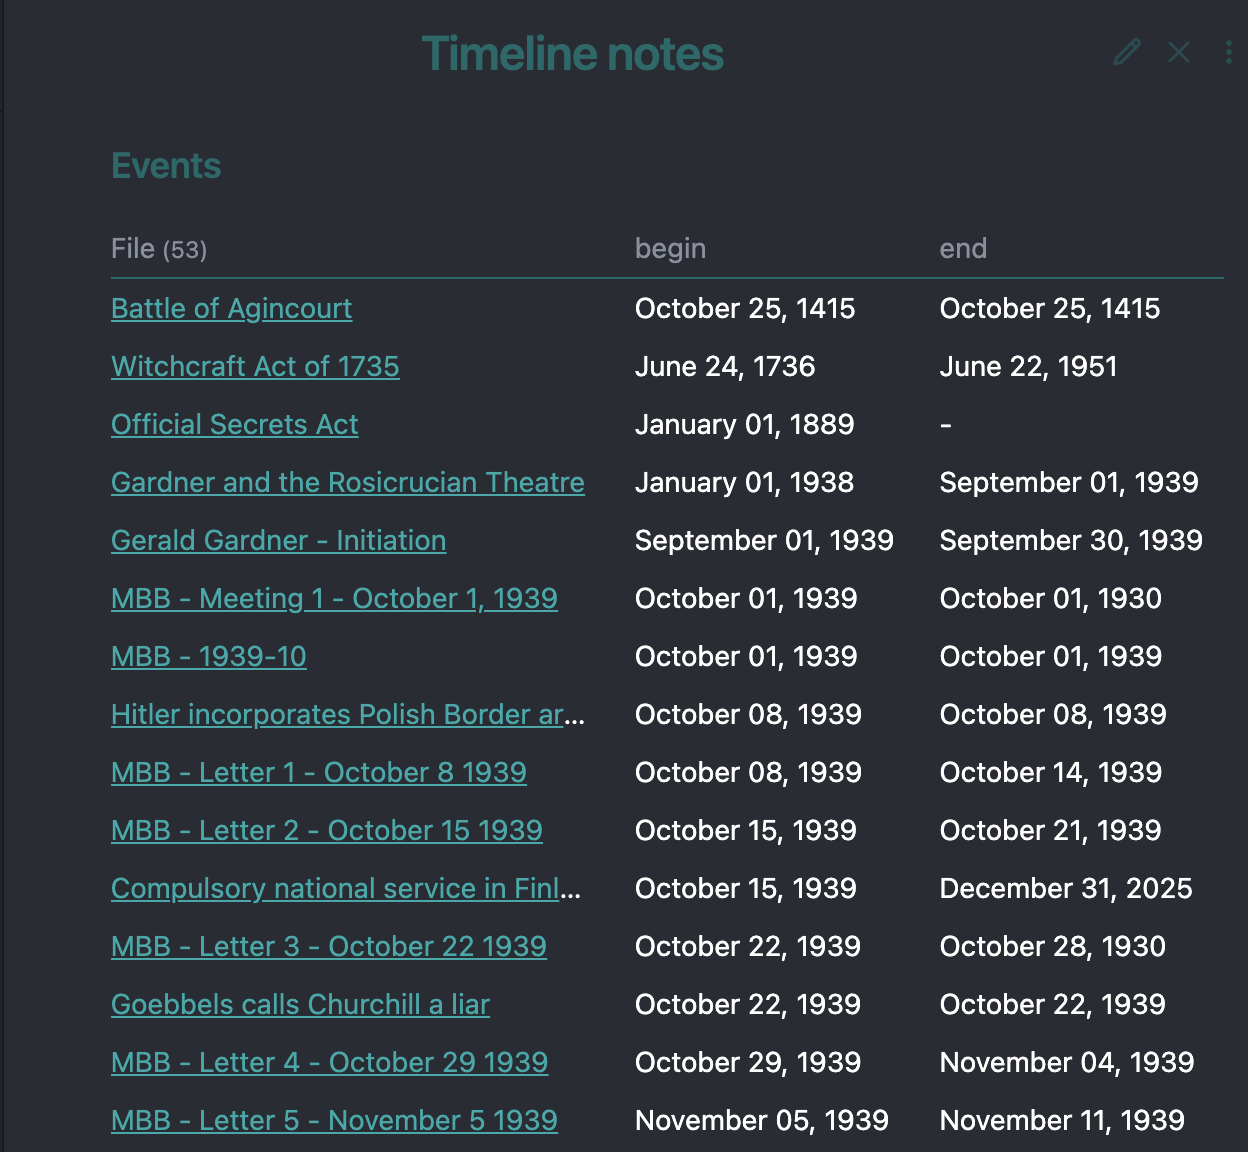 Screenshot of events in a chronological list, with links to each file in the left column, the beginning date in the second column, and the ending date in the right column.